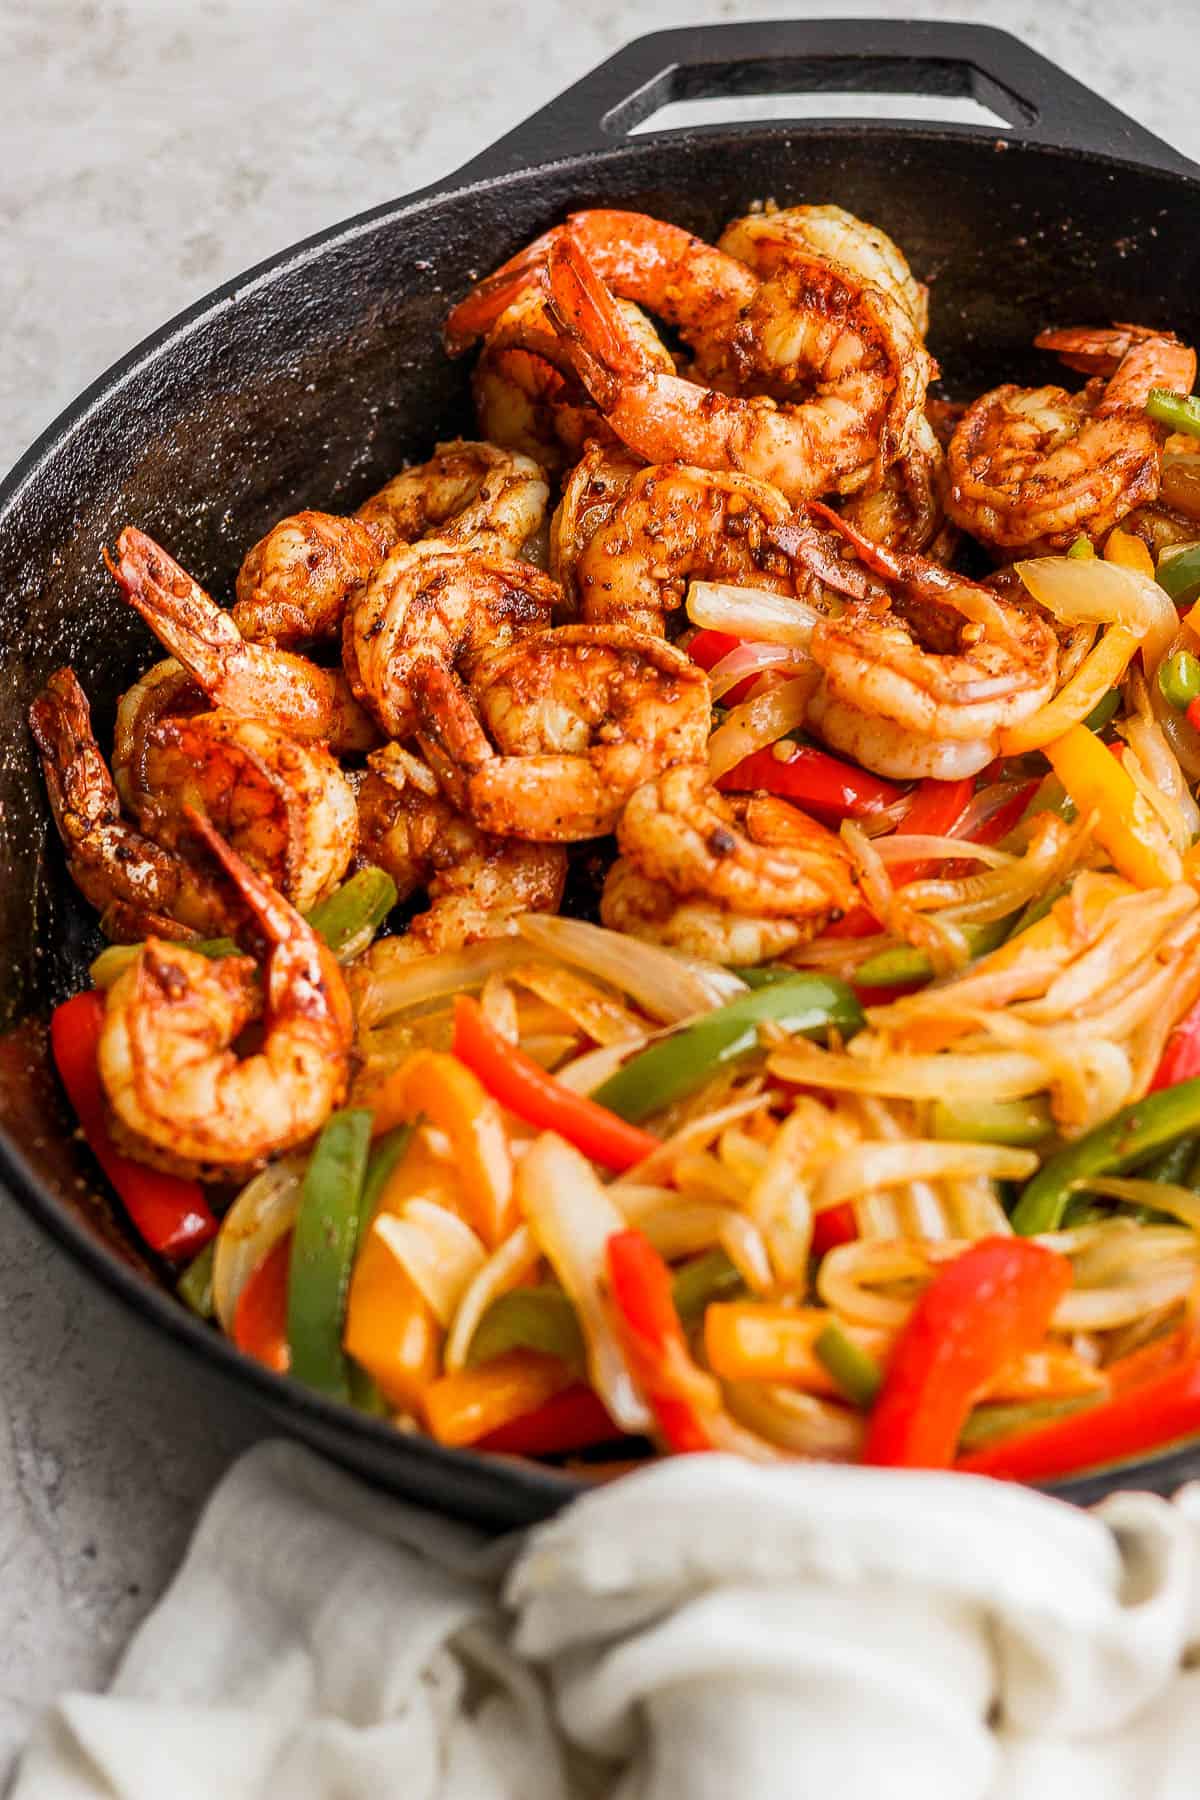 Shrimp Fajitas in a cast-iron skillet ready to be served.